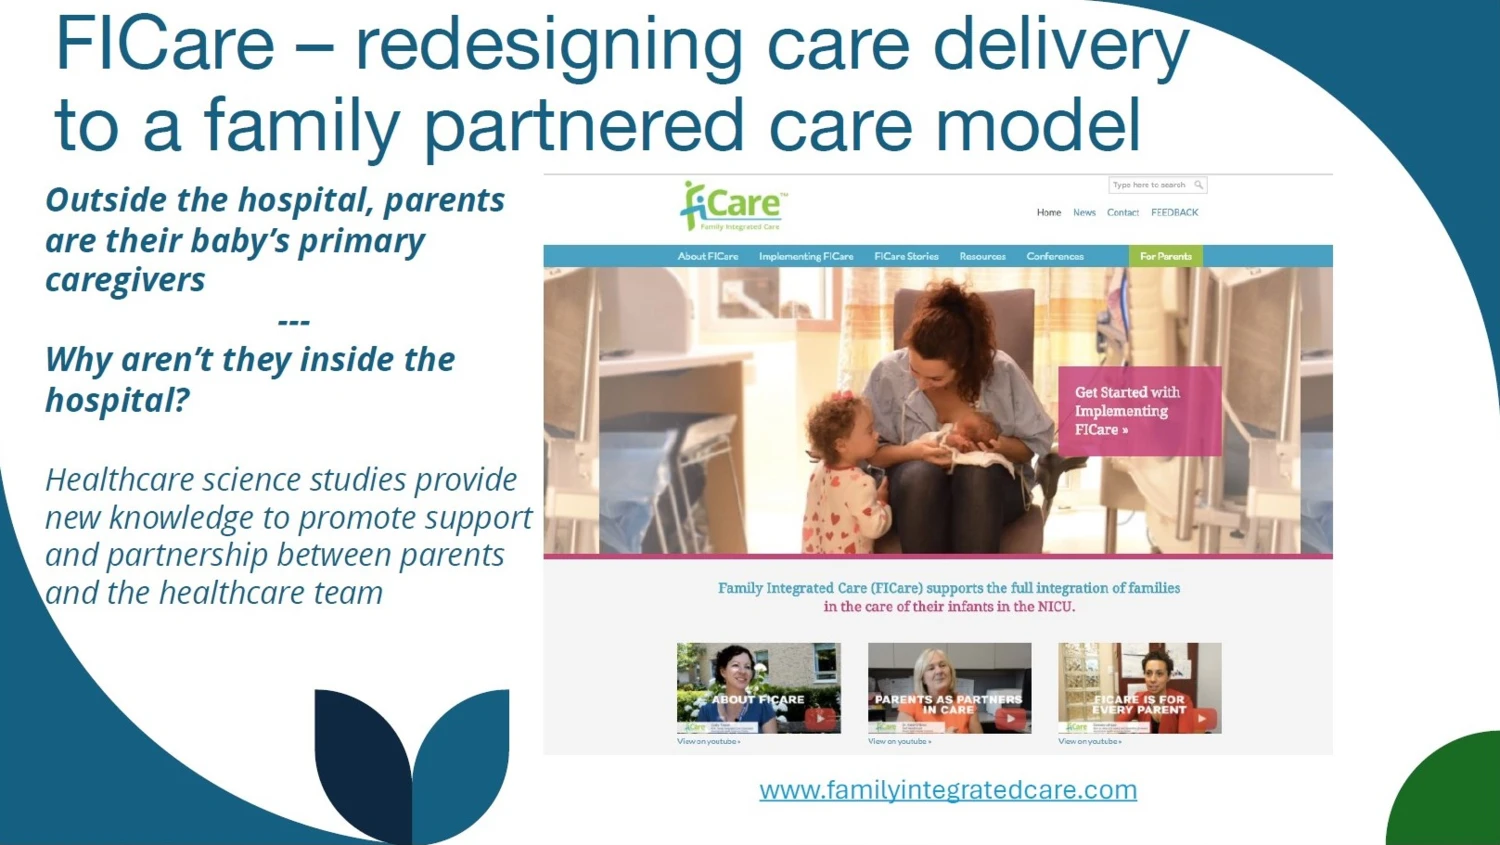 Family Integrated Care (FICare)